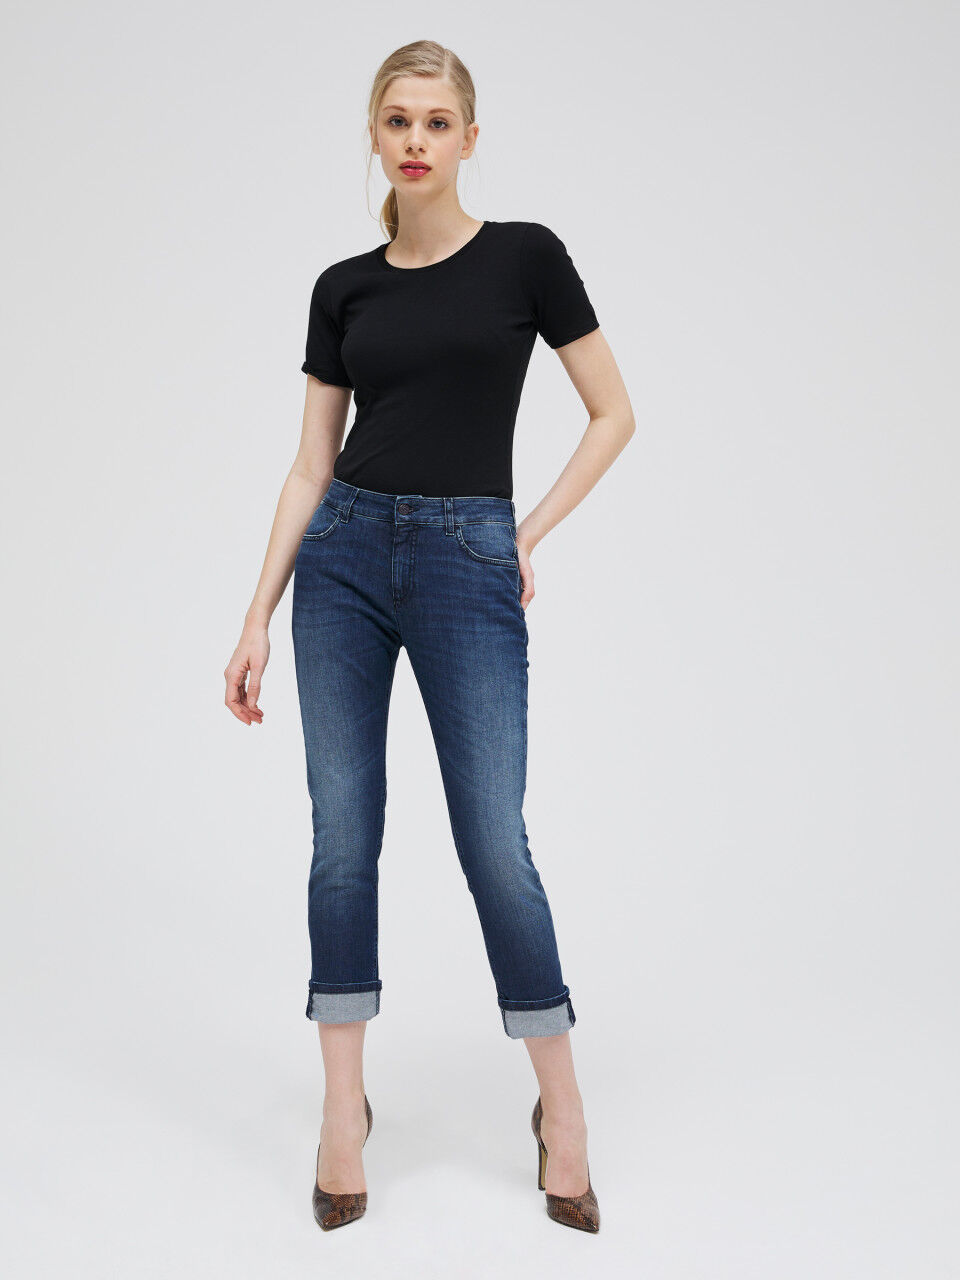 Slim carrot fit Lima jeans